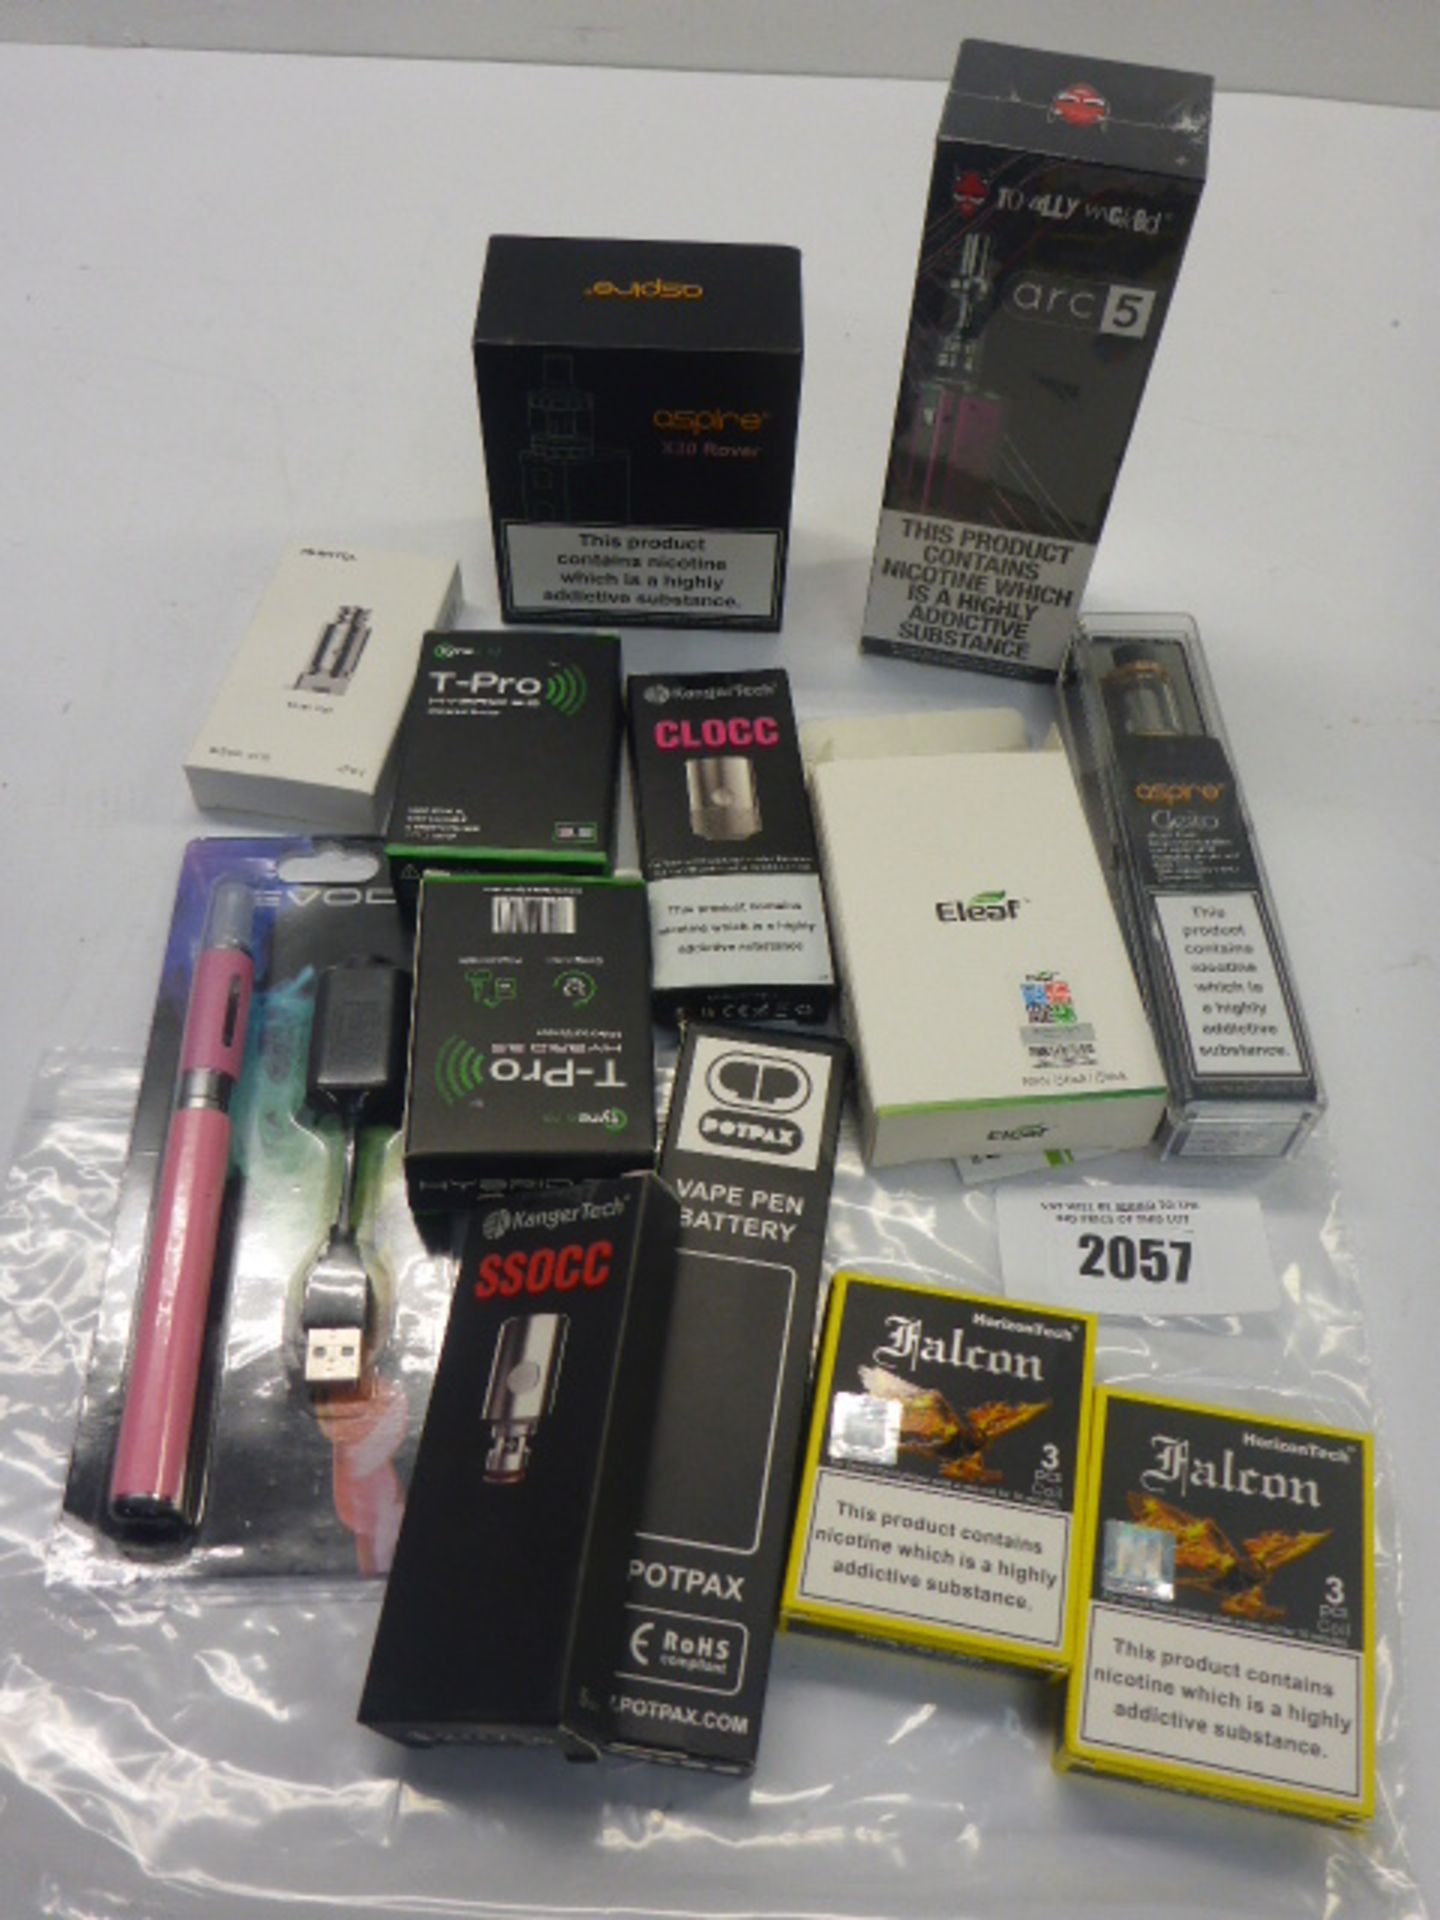 Bag of Vaping accessories, various Brands, Aspire, Totally wicked, etc.